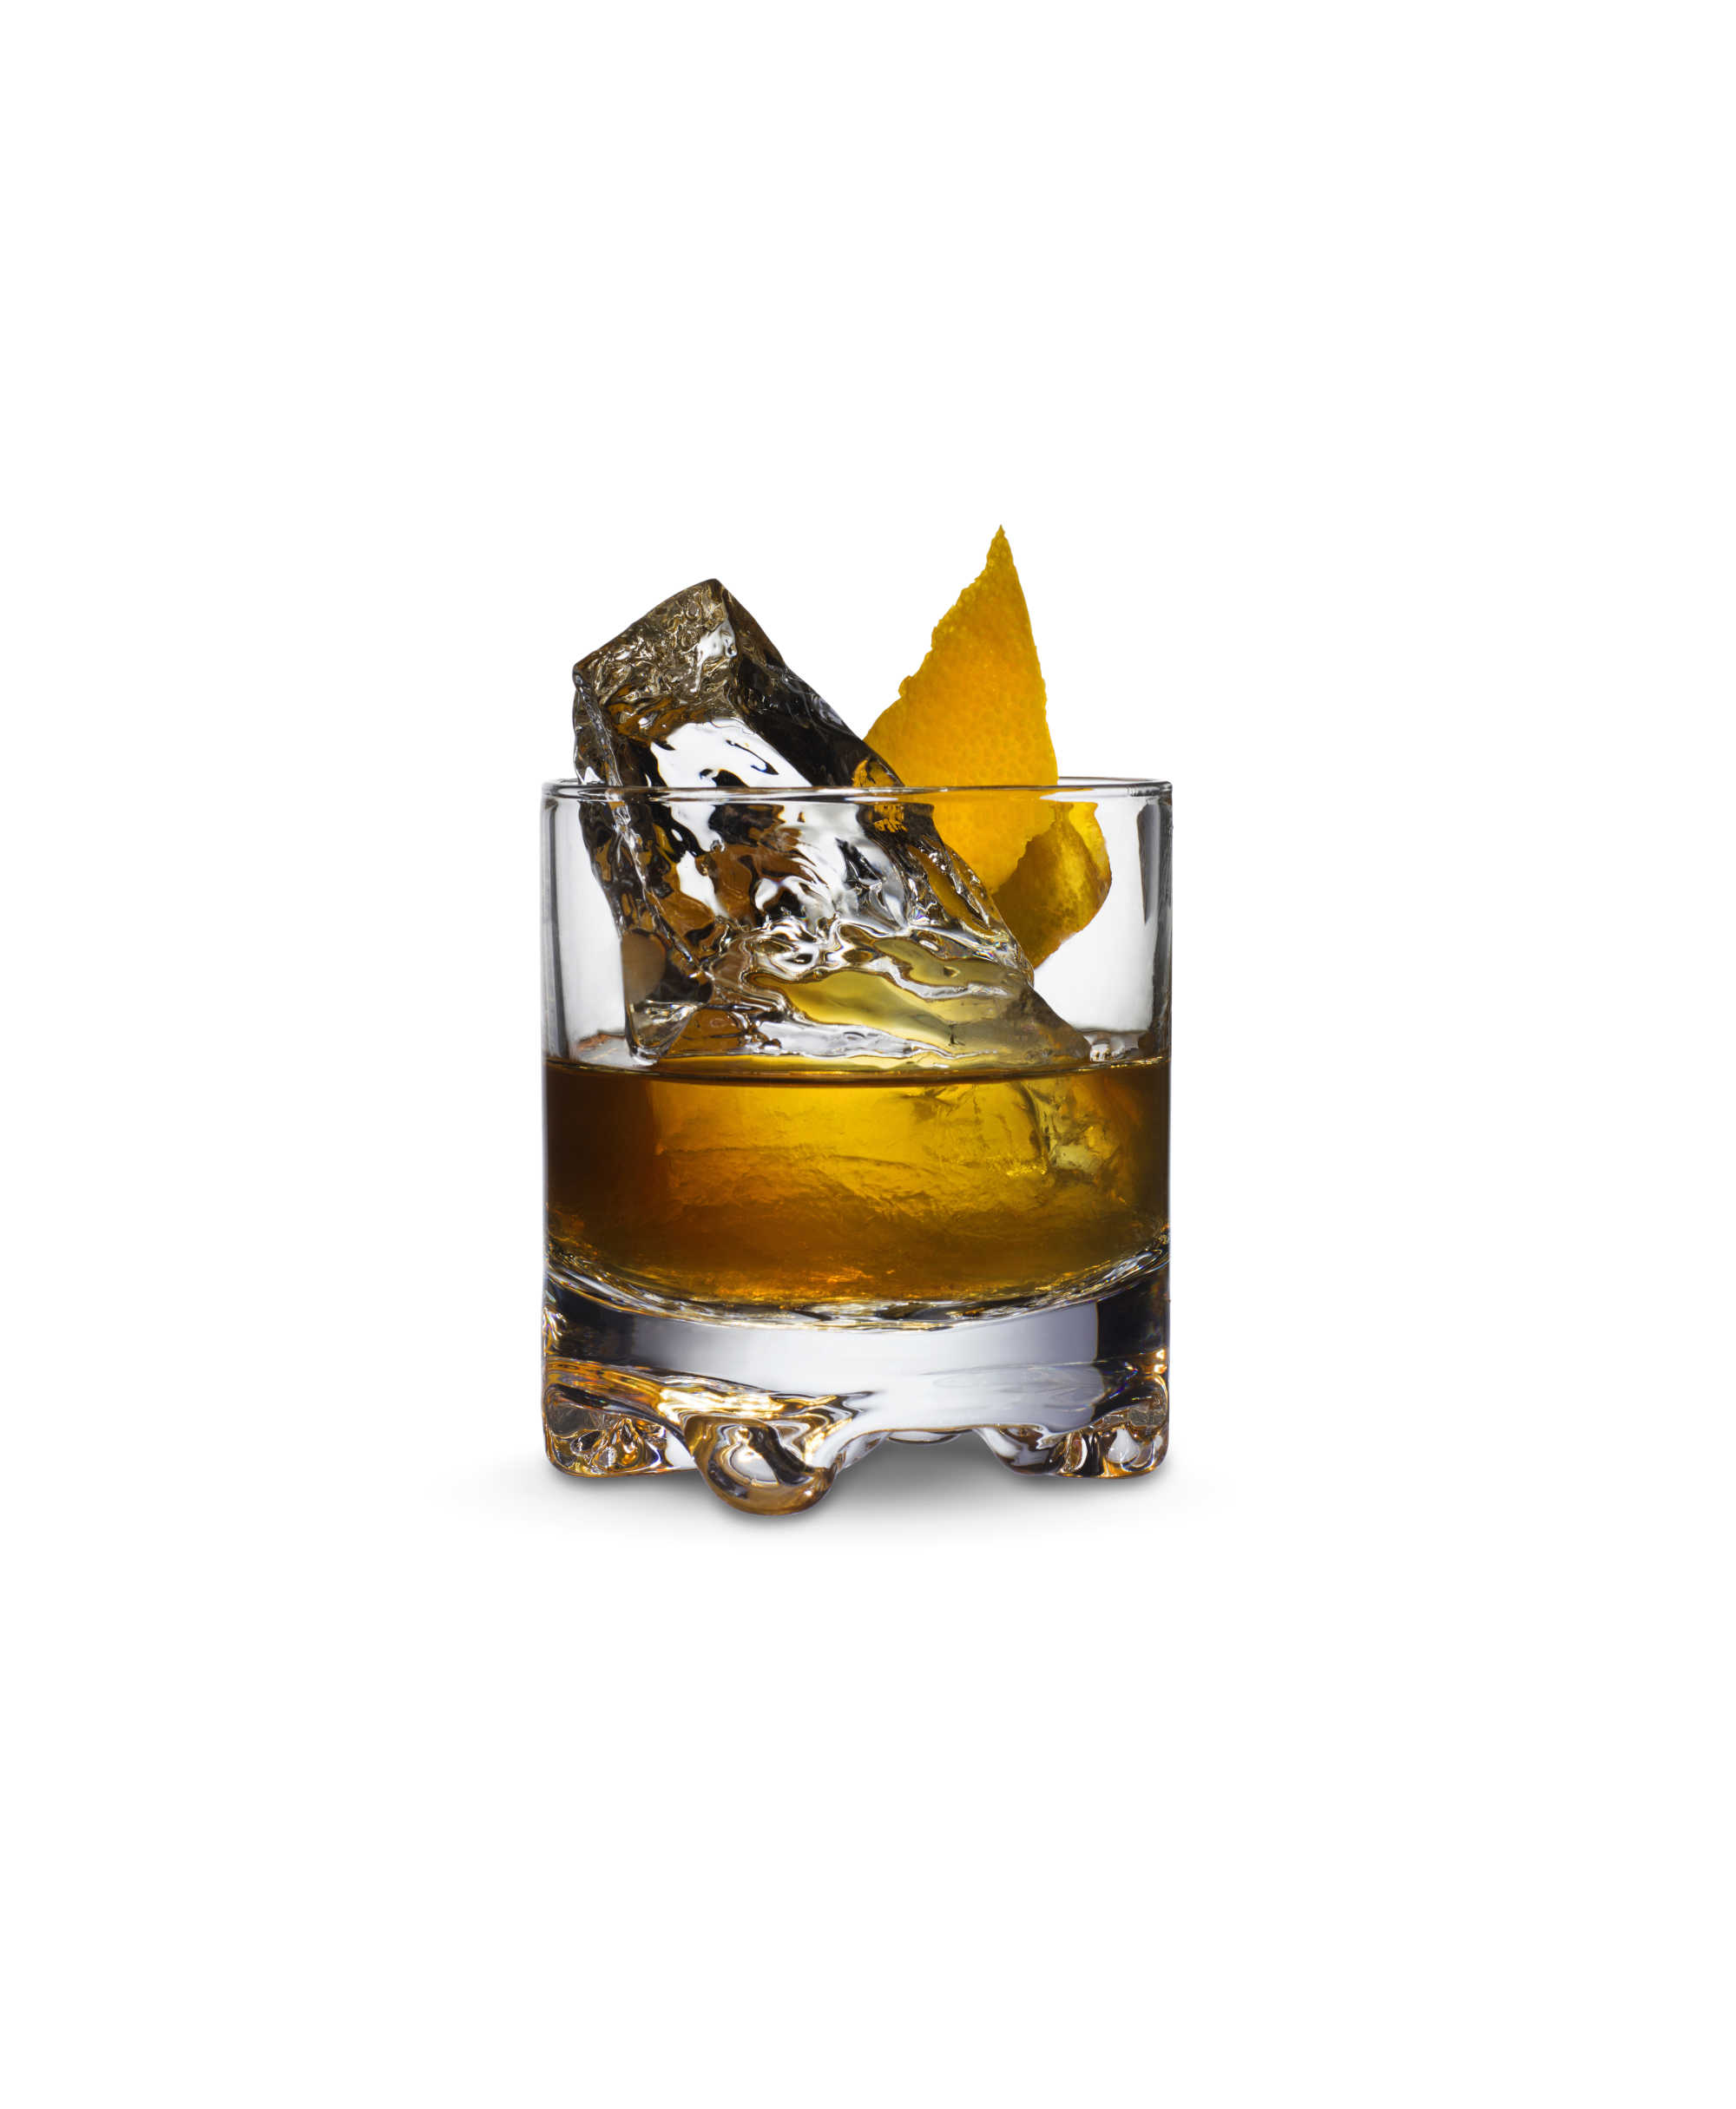 Old Fashioned is a classic whisky cocktail served on ice. Old Fashioned made with using Kyrö Malt is garnished with orange peel.